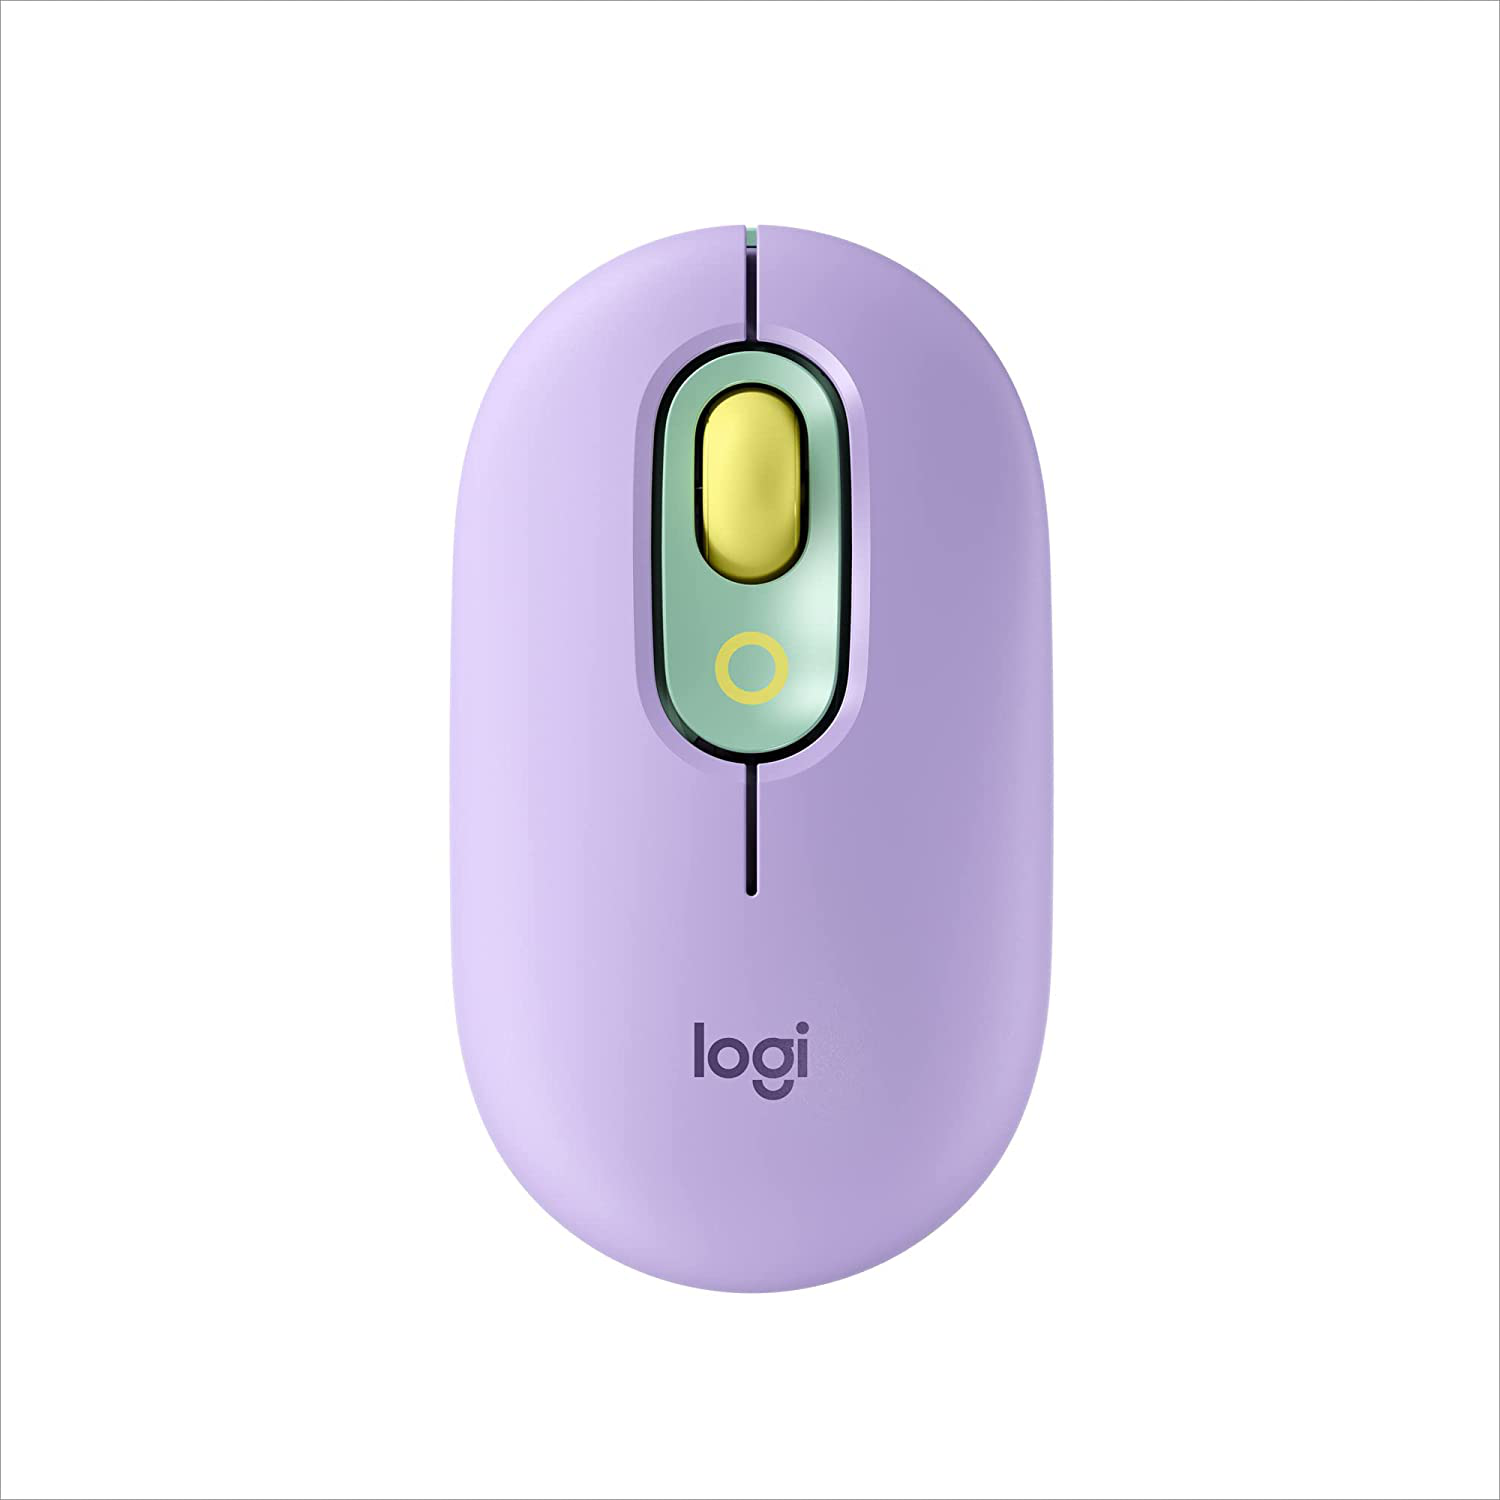 Logitech POP Mouse, Wireless Mouse with Customizable Emojis, Silenttouch Technology, Precision/Speed Scroll, Compact Design, Bluetooth, USB, Multi-Device, OS Compatible - Blast Yellow